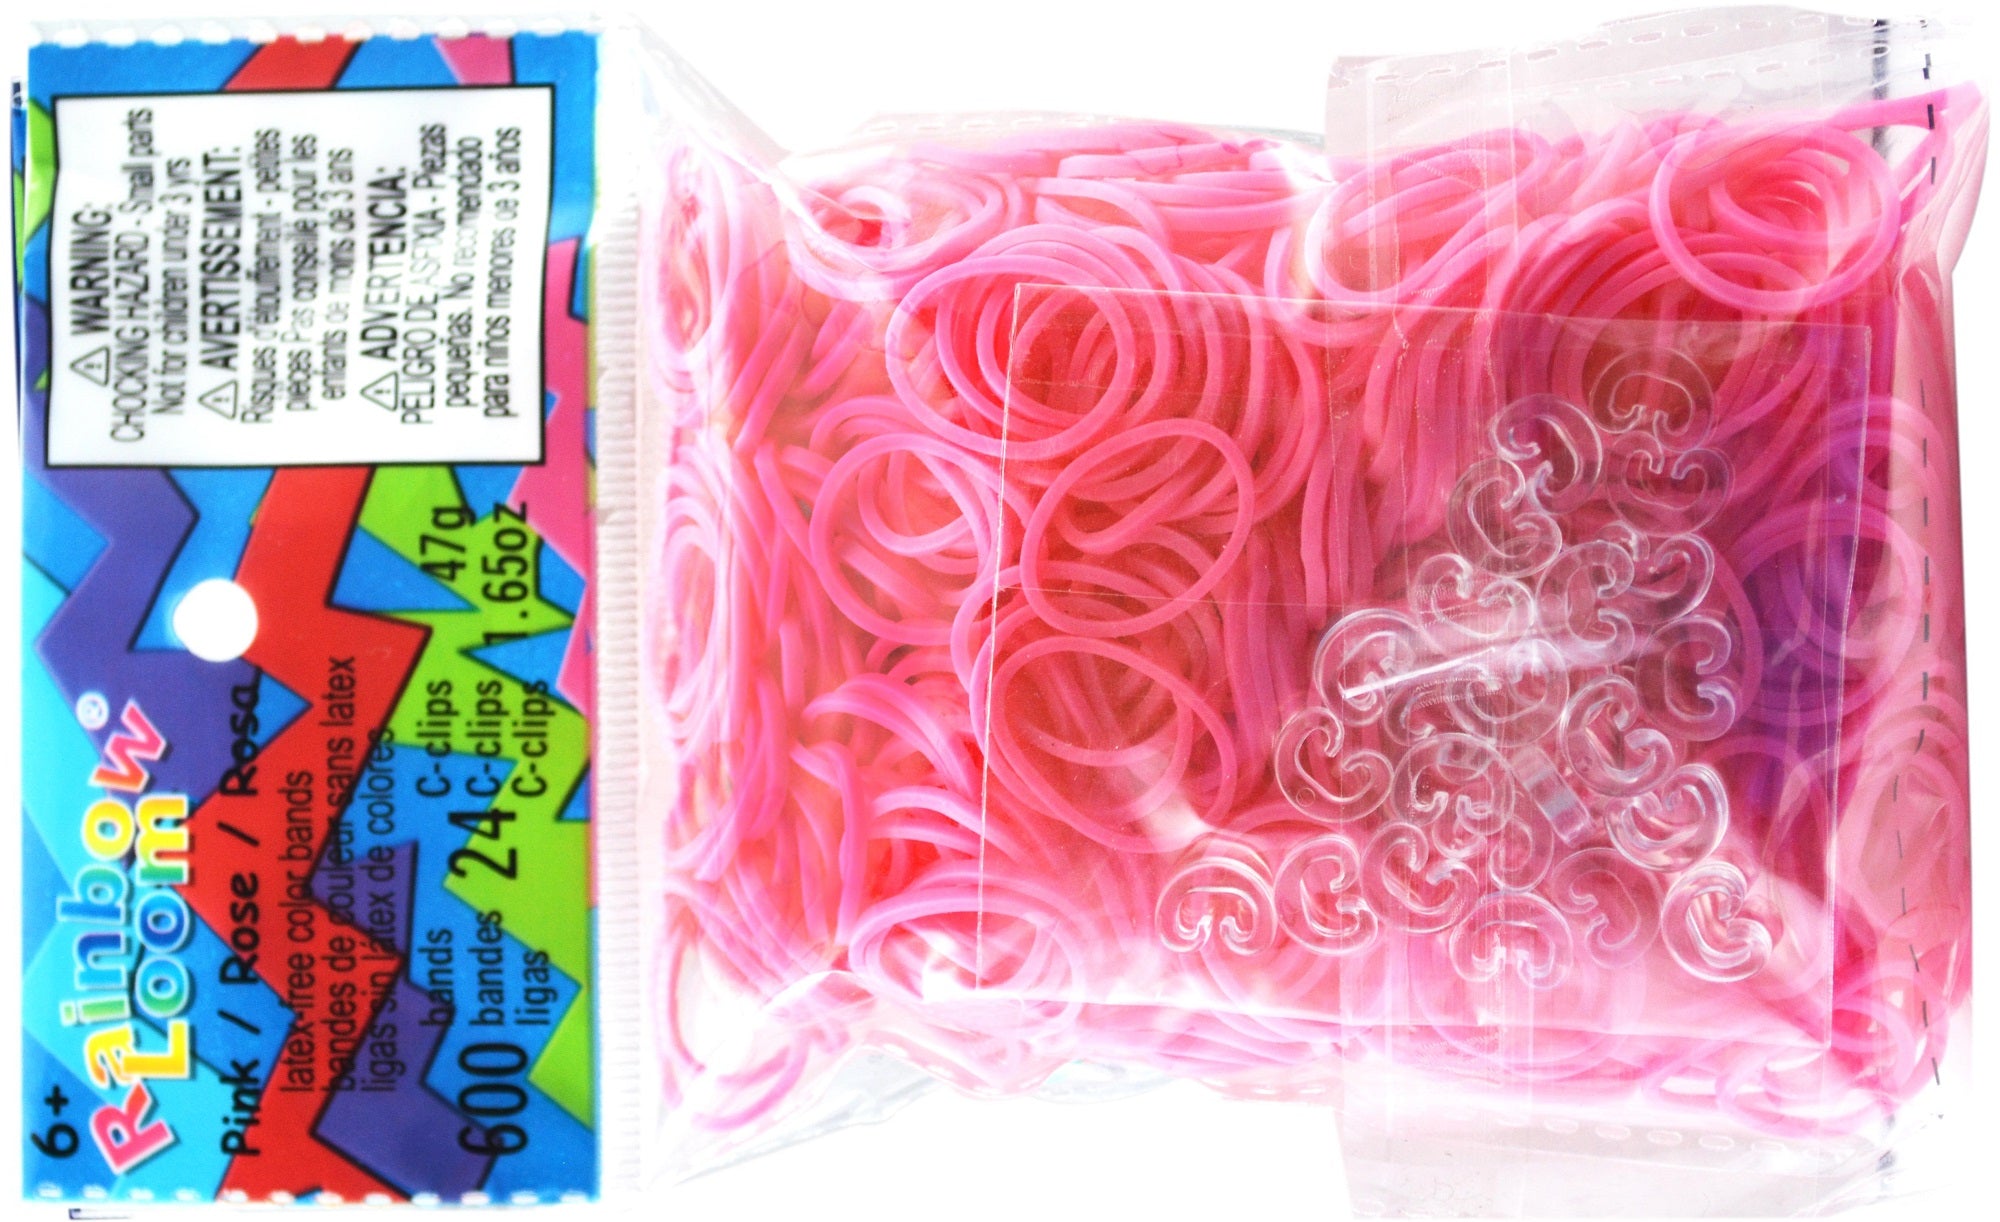 Rainbow Loom® Authentic Rubber Bands, Ocean Blue and Pink Set of Two 600- band Packages With 24 C-clips and a FREE BRACELET -  Singapore